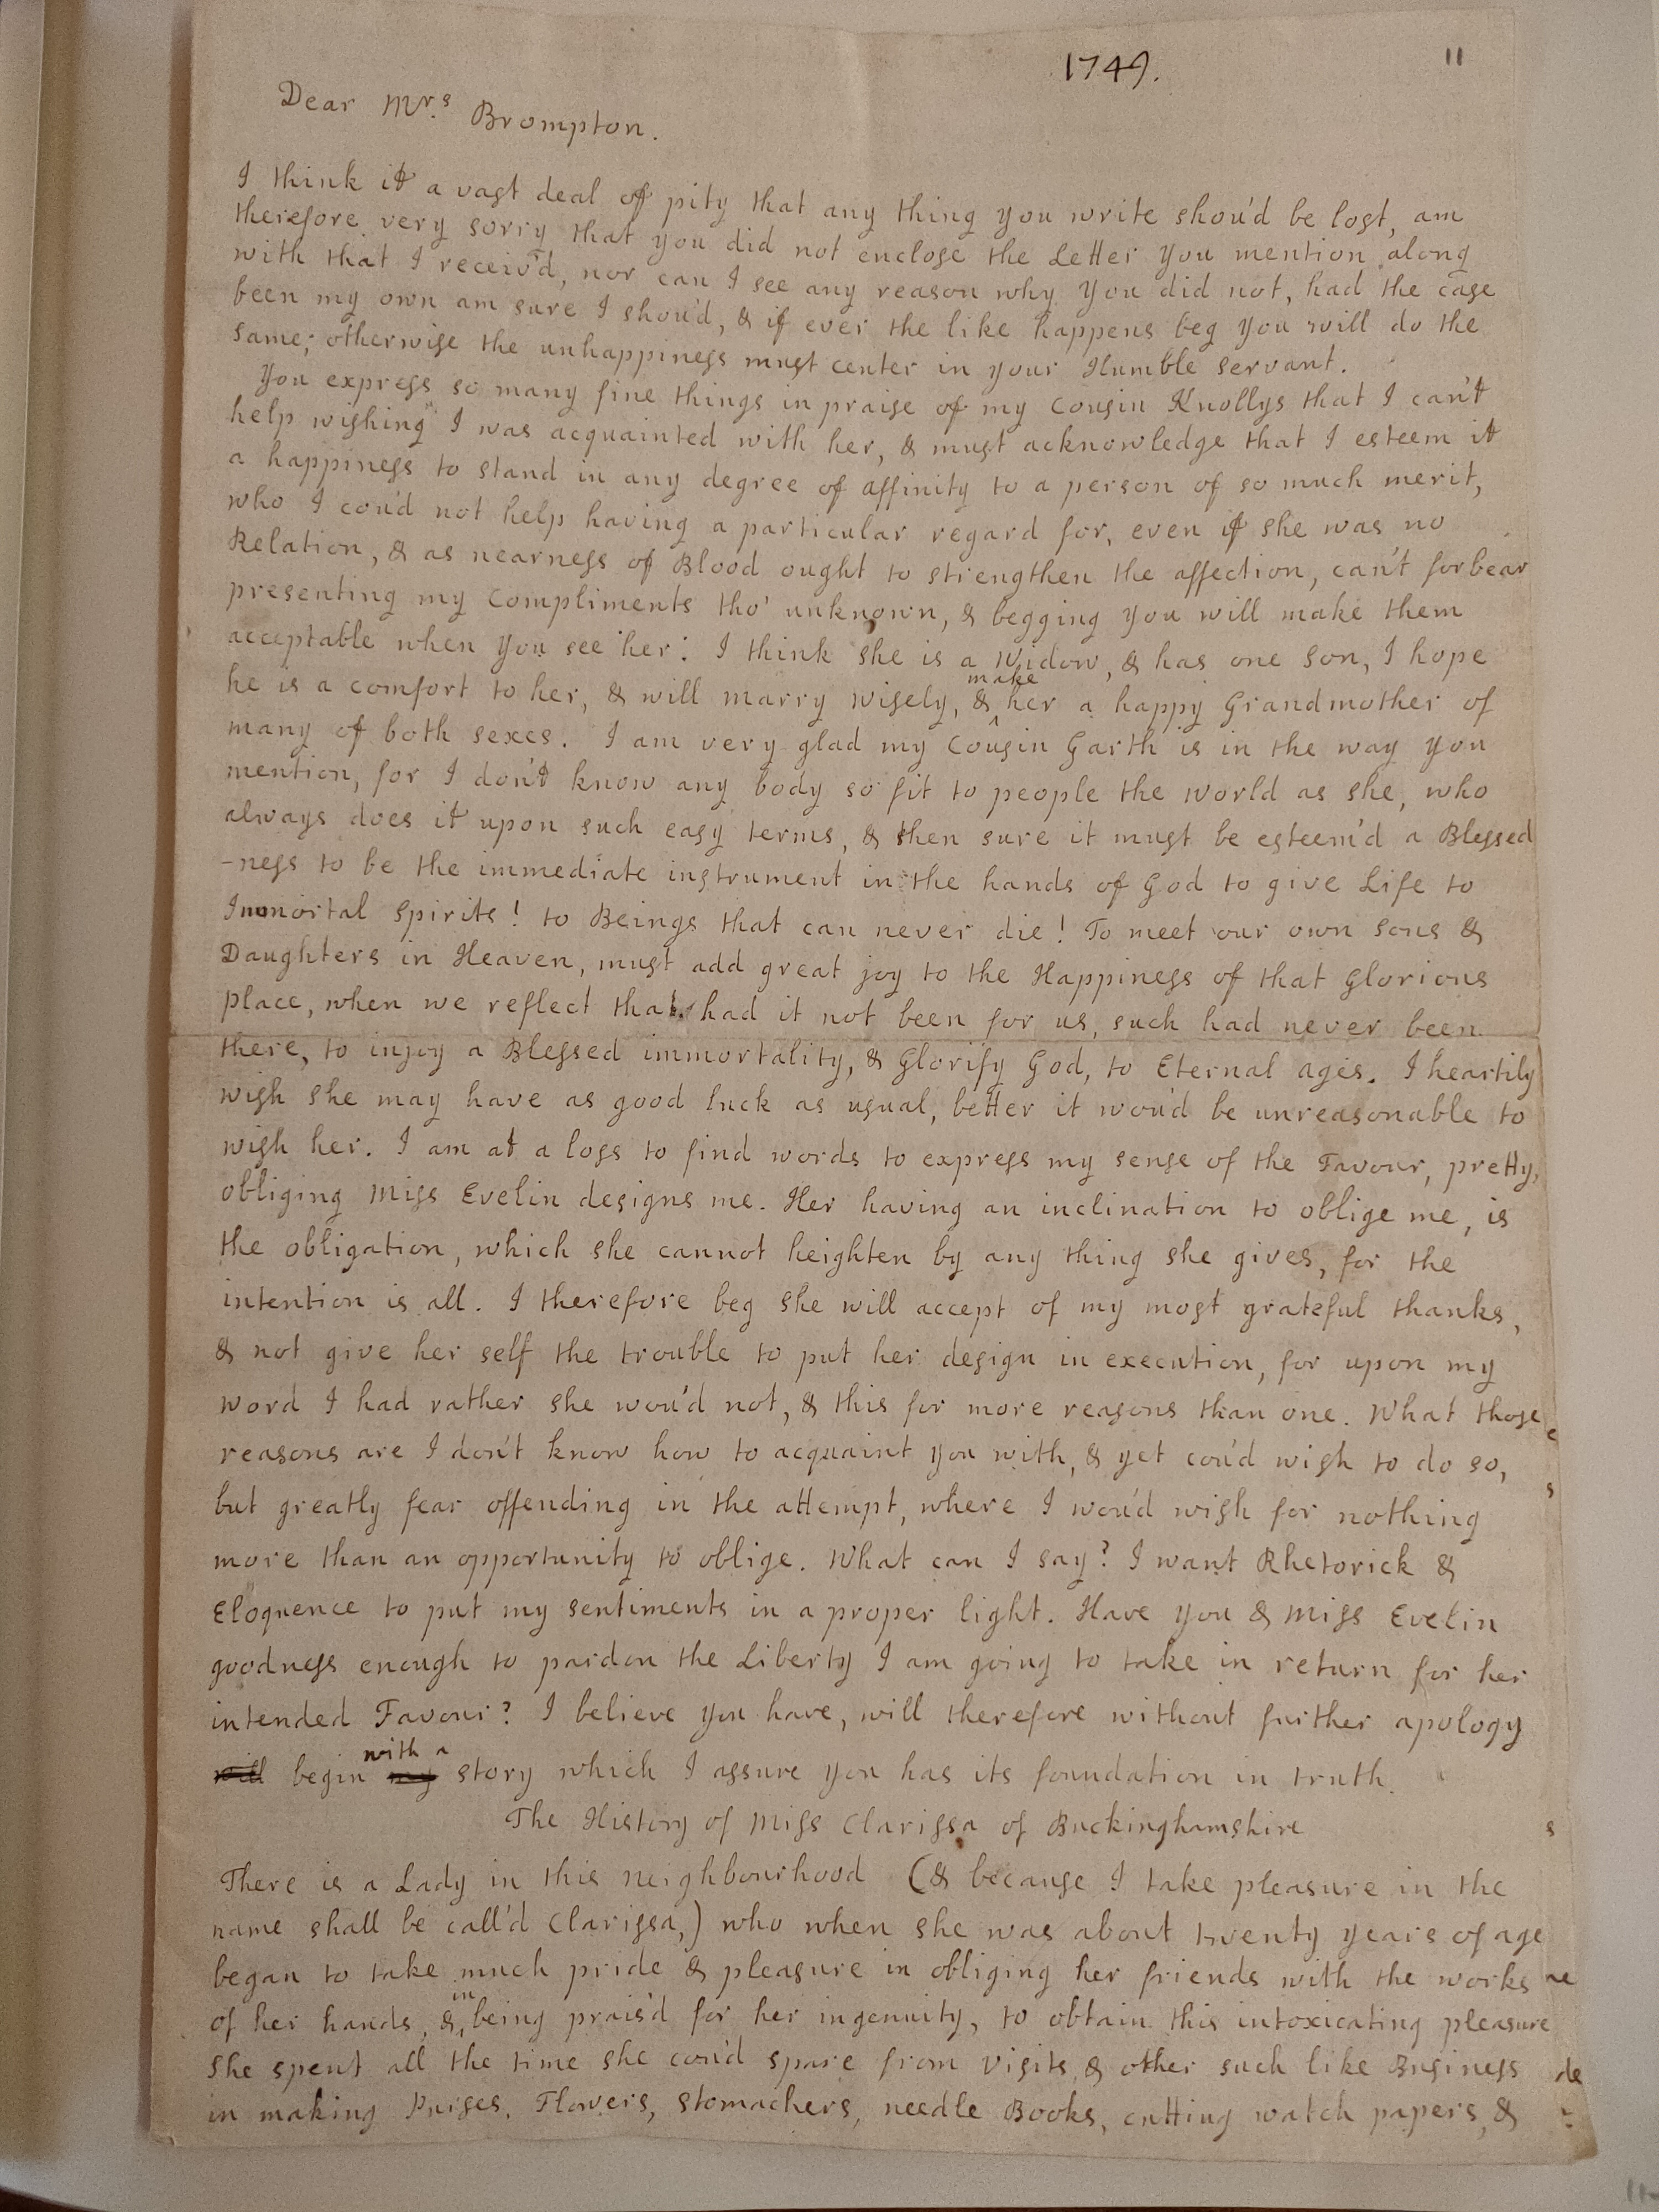 Image #1 of letter: Jane Johnson to Mrs Brompton, 17 October 1749